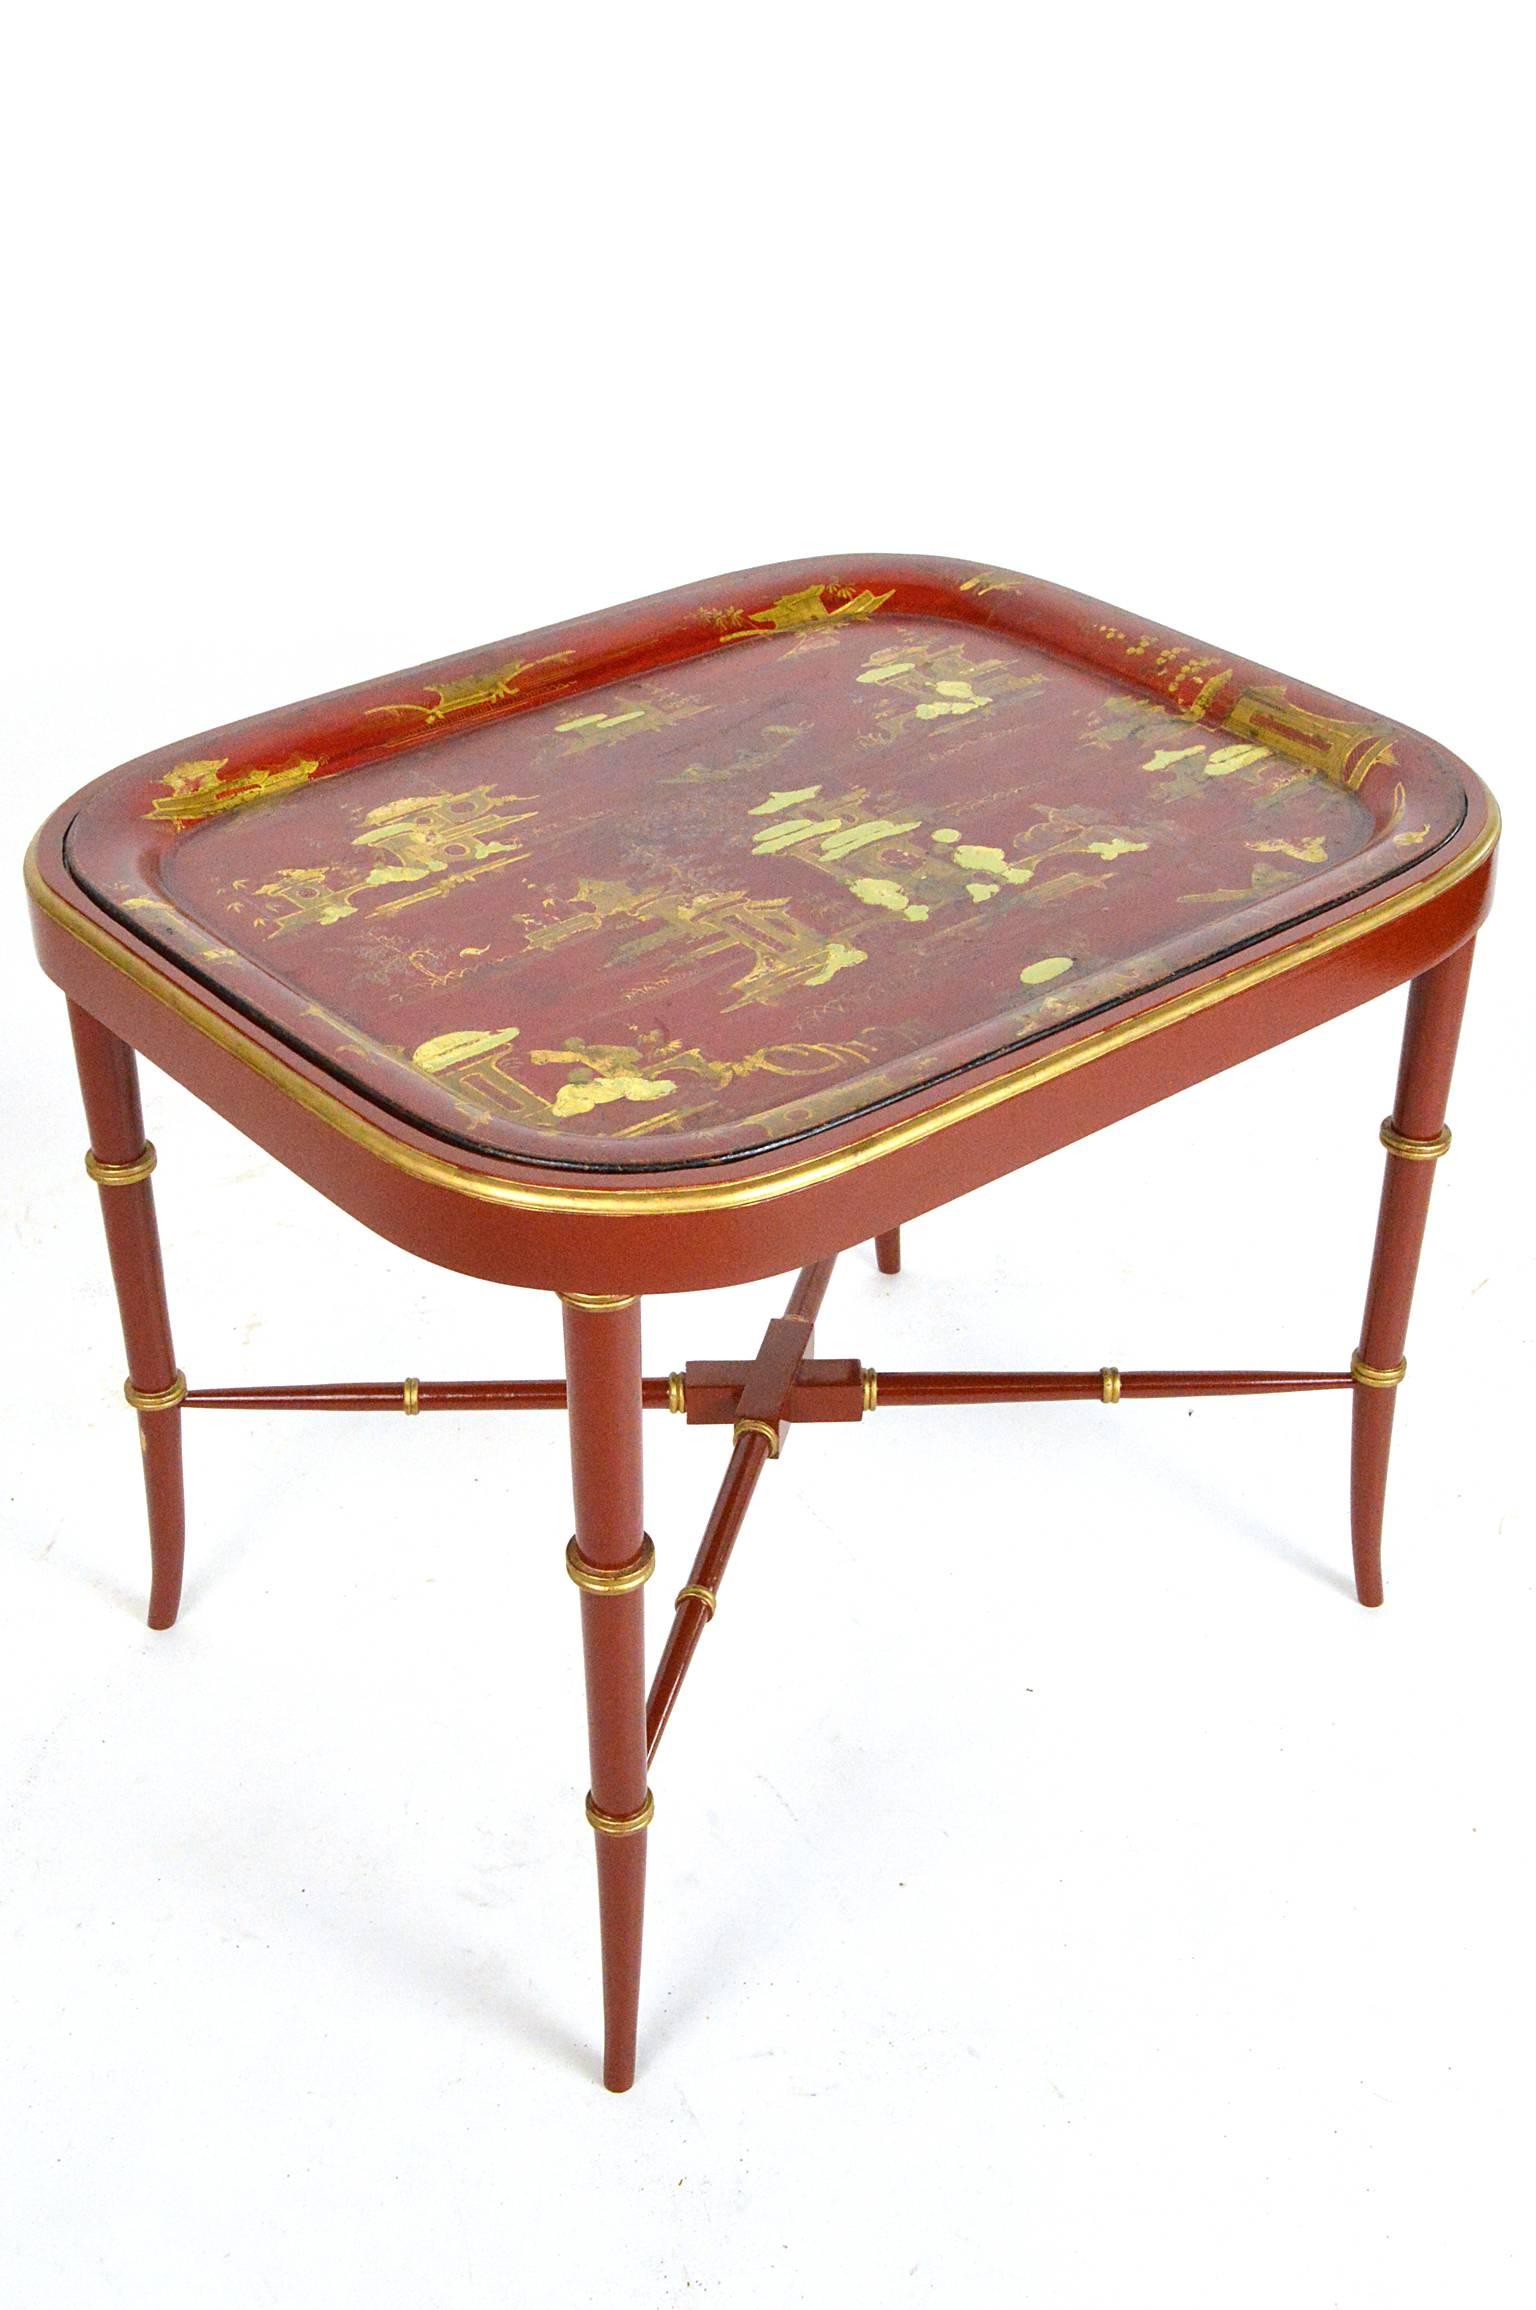 19th century red chinoiserie tray table. Stand having faux bamboo decoration. Tray depicting Asian motif. Absolutely stunning color combination.